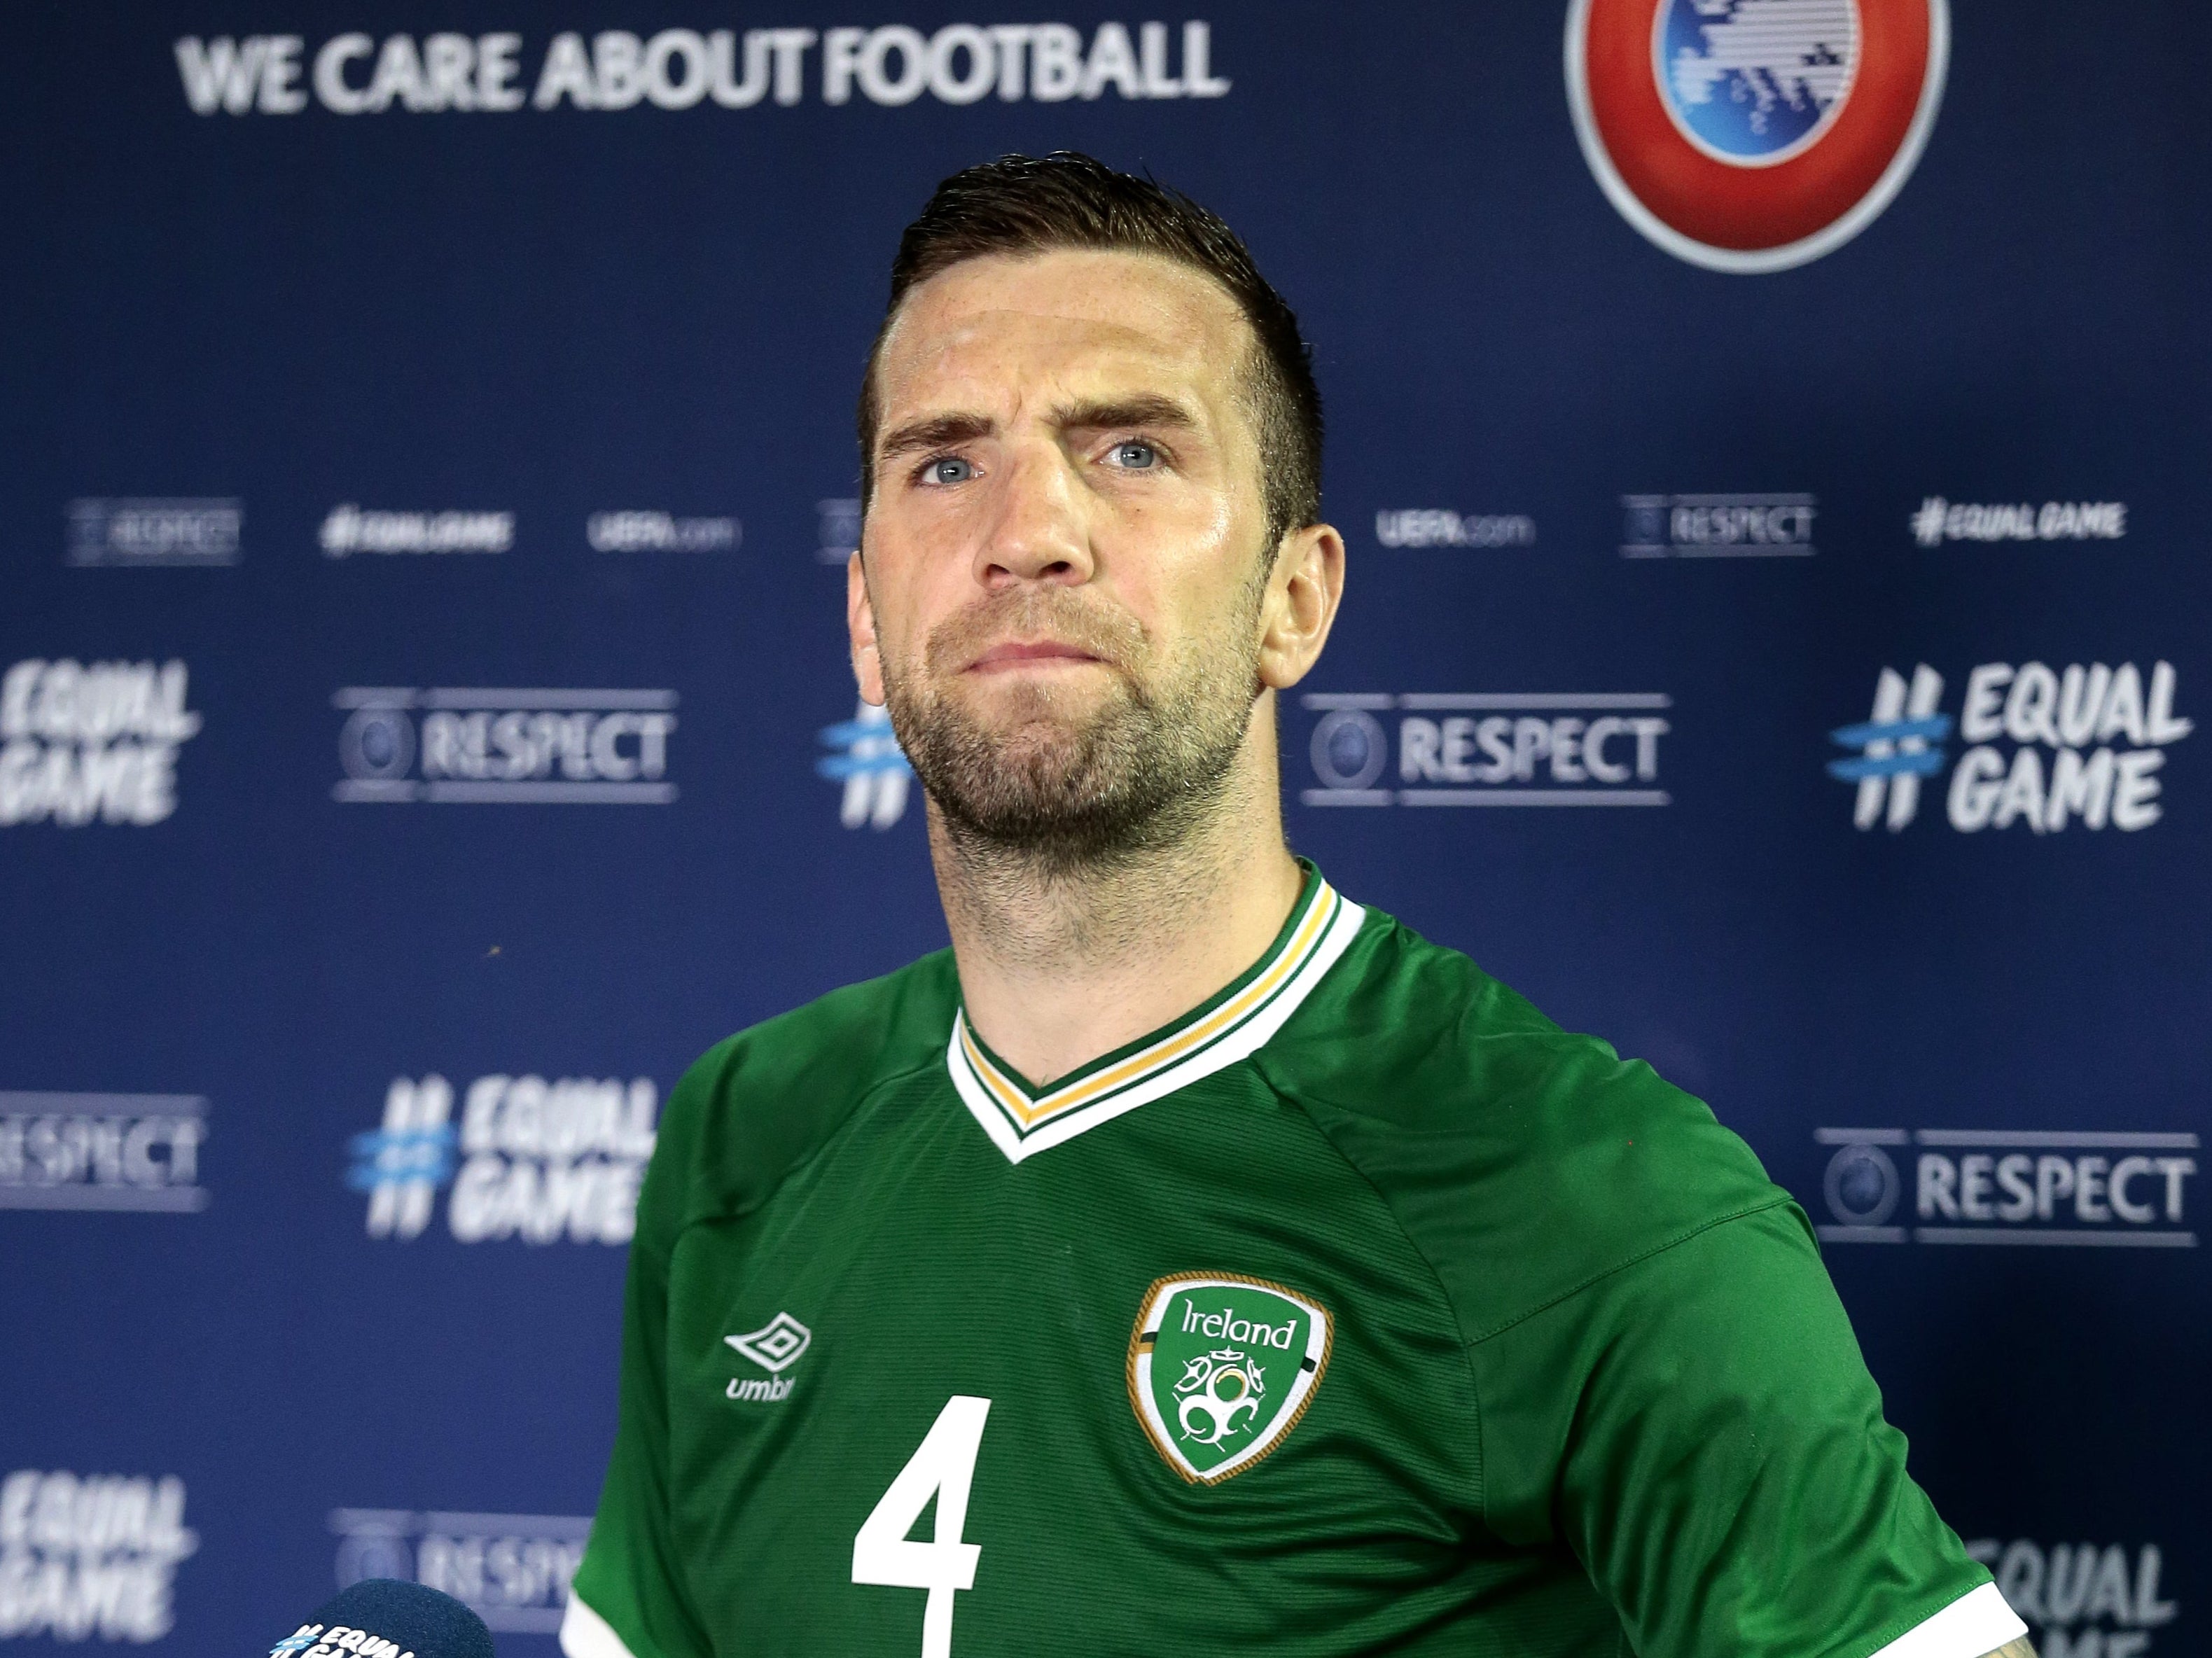 Republic of Ireland defender Shane Duffy insists the World Cup qualifying campaign is far from over